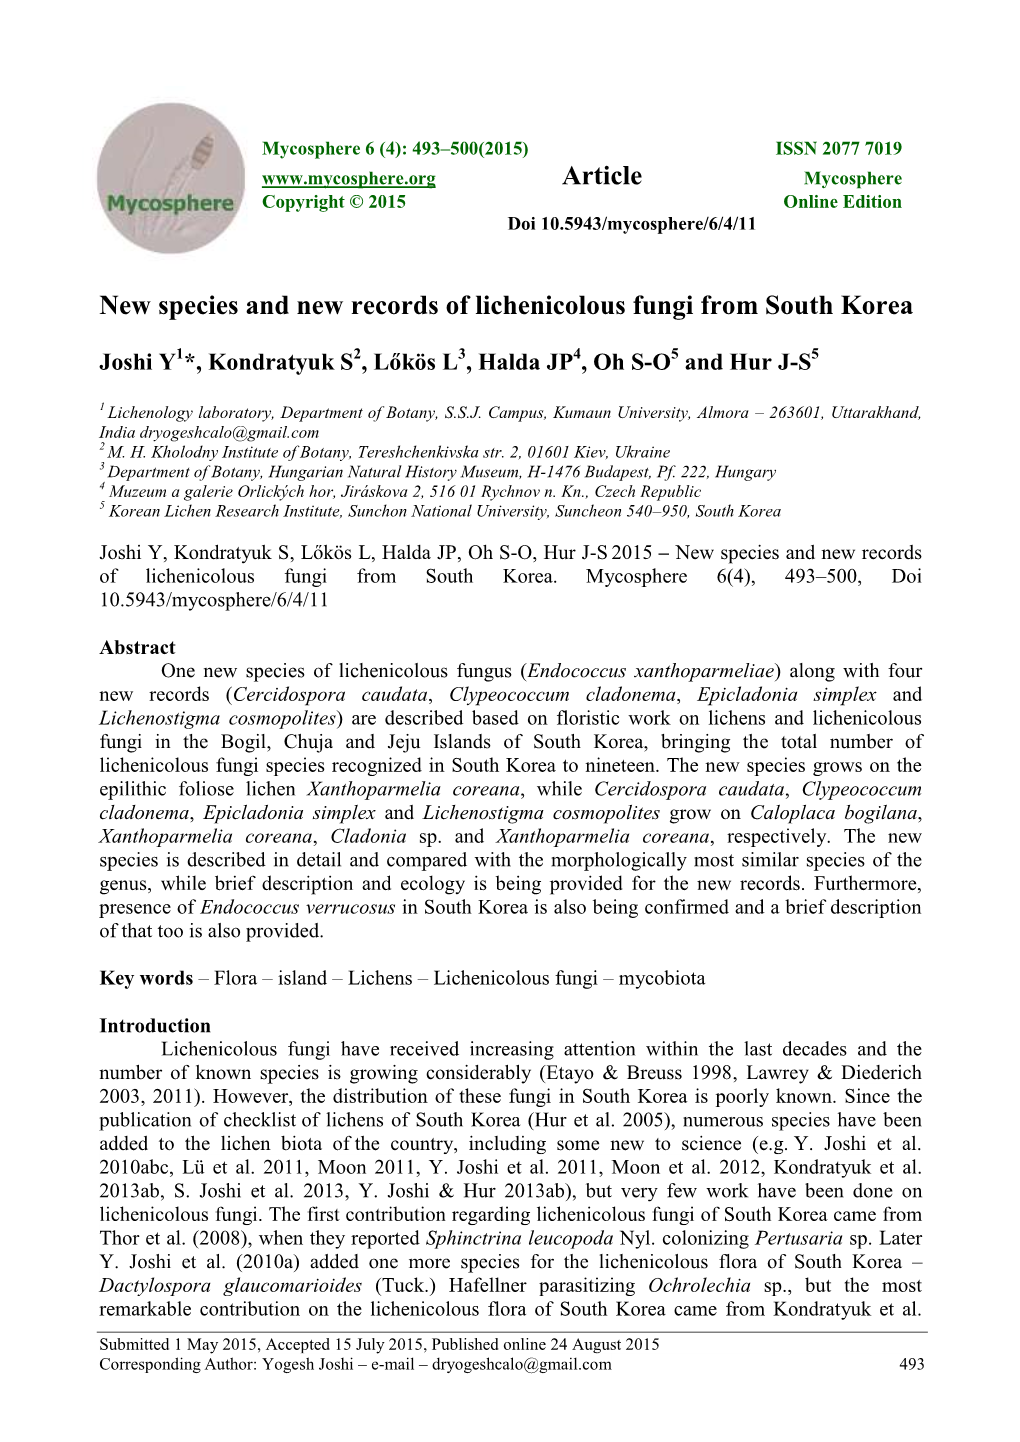 New Species and New Records of Lichenicolous Fungi from South Korea